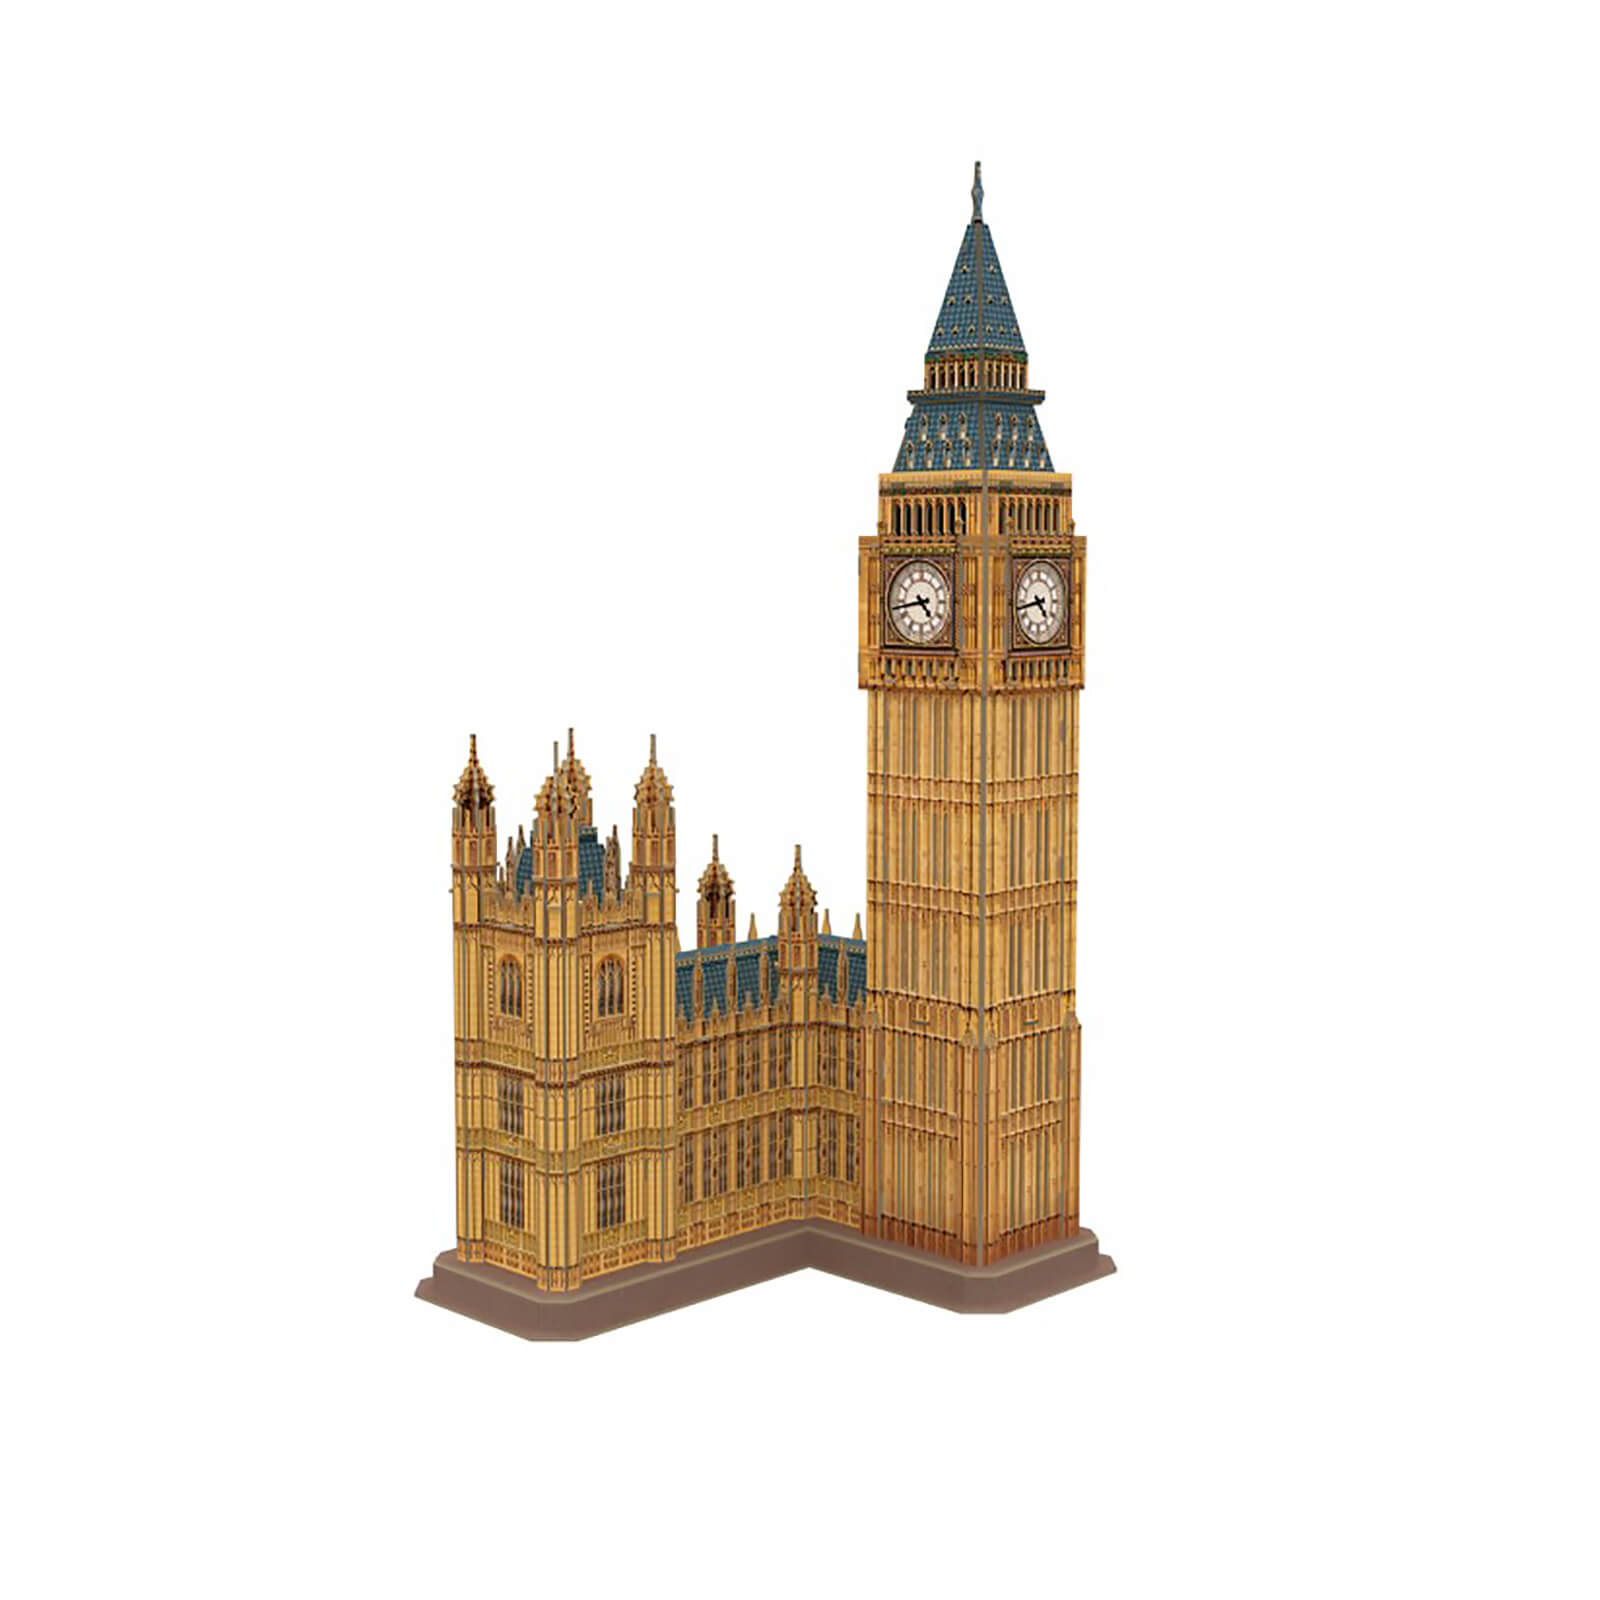 National Geographic - Big Ben 3D Jigsaw Puzzle